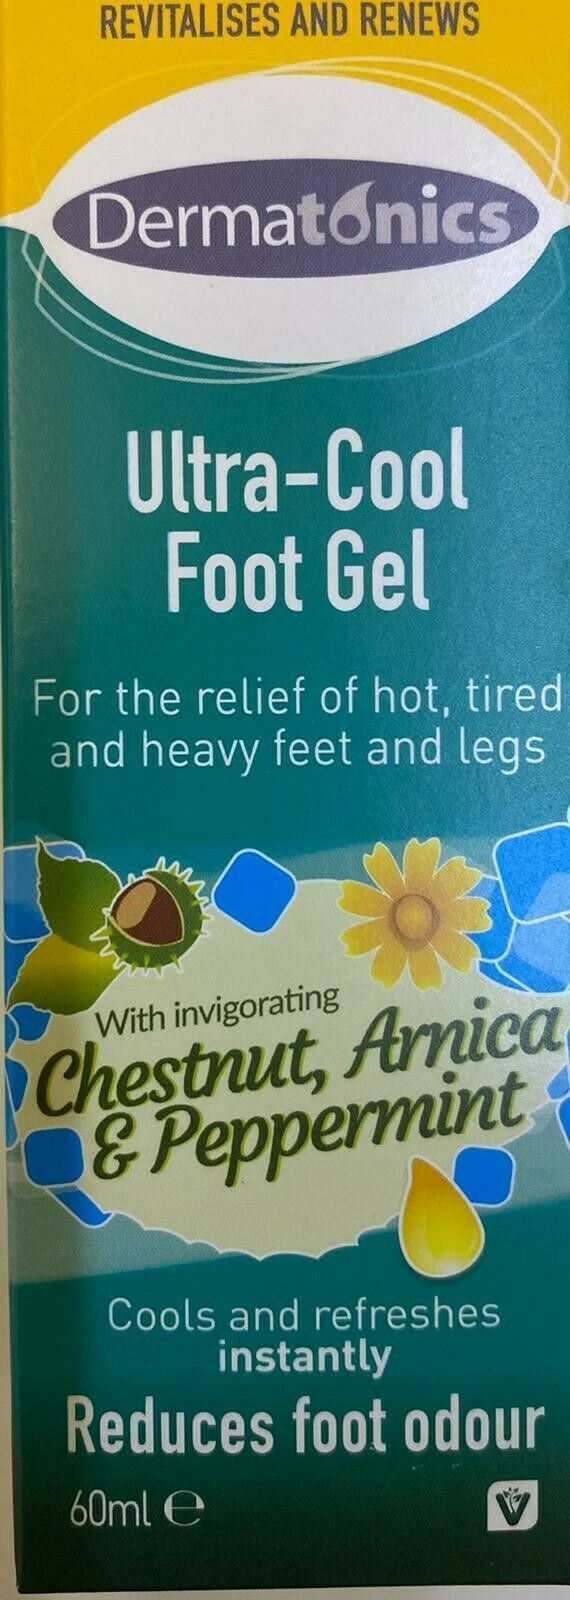 Ultra cool foot gel 60ml reduces foot odour, relieves hot, tired & heavy feet